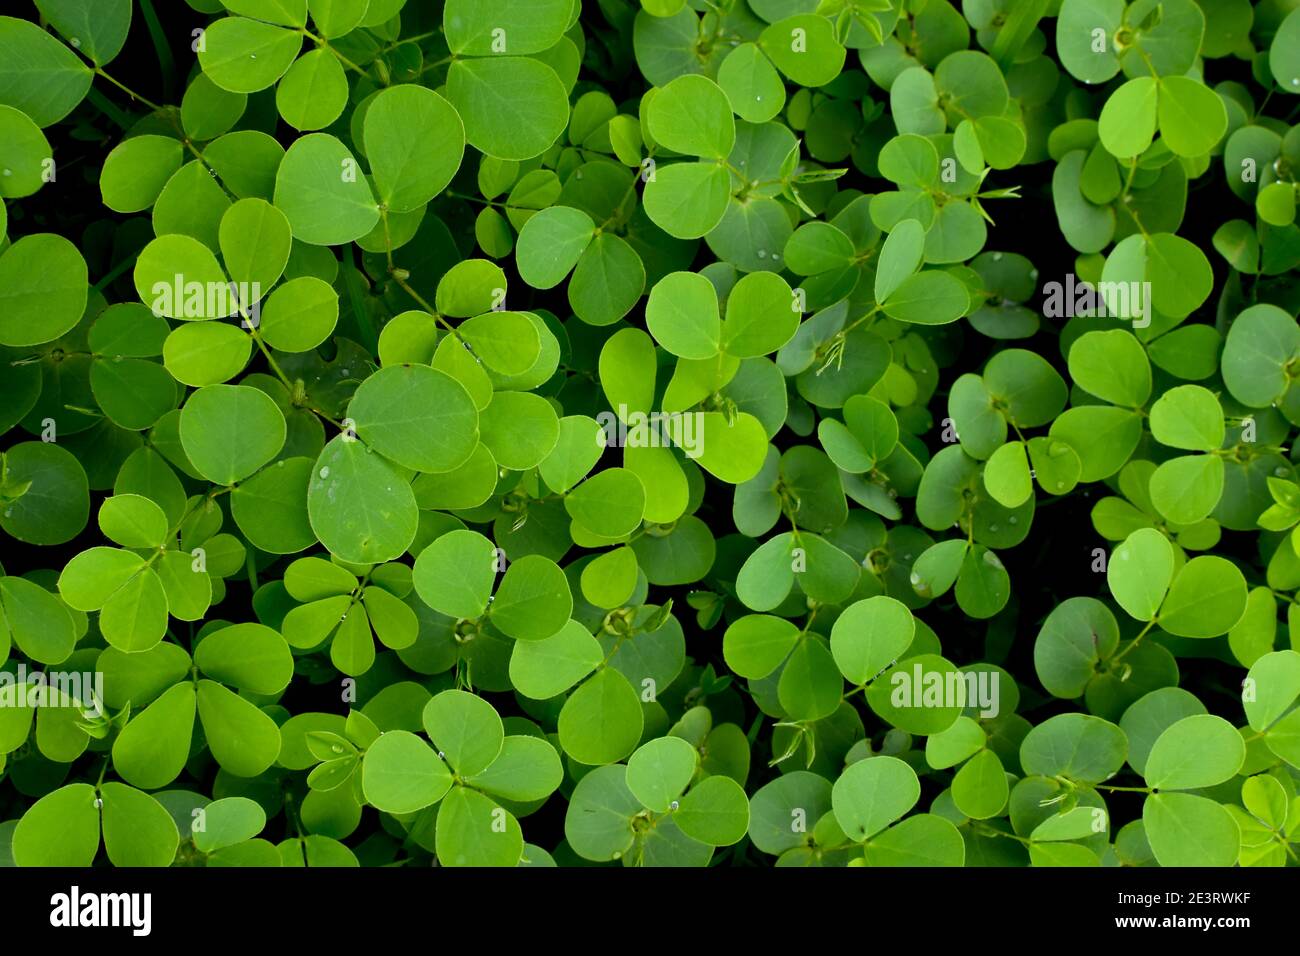 Natural Patterns of green leaves of Cassia tora shrubs. Stock Photo